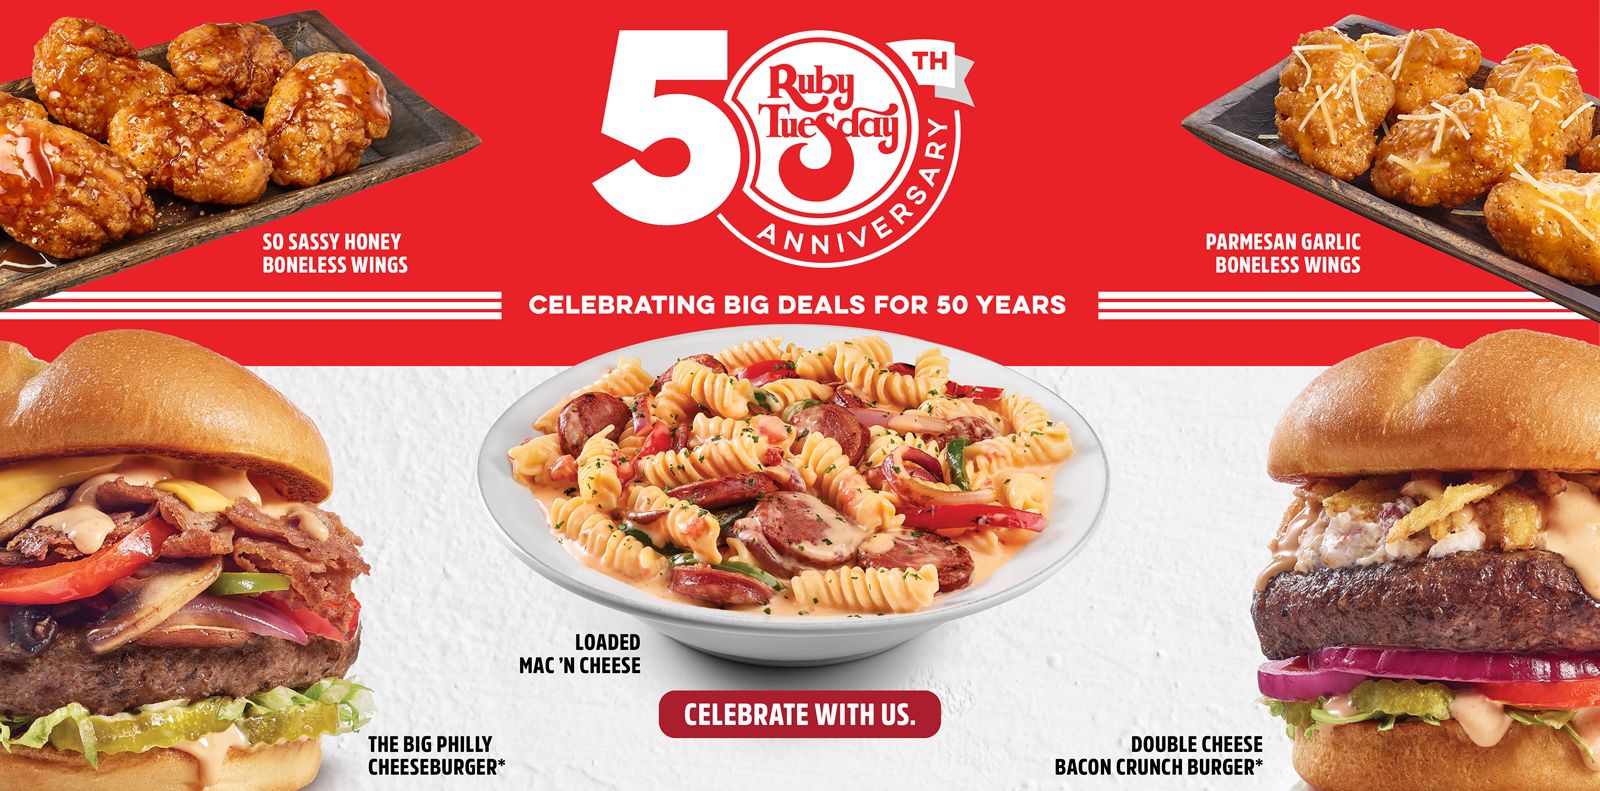 Ruby Tuesday Celebrates 50th Anniversary with Big New Flavors